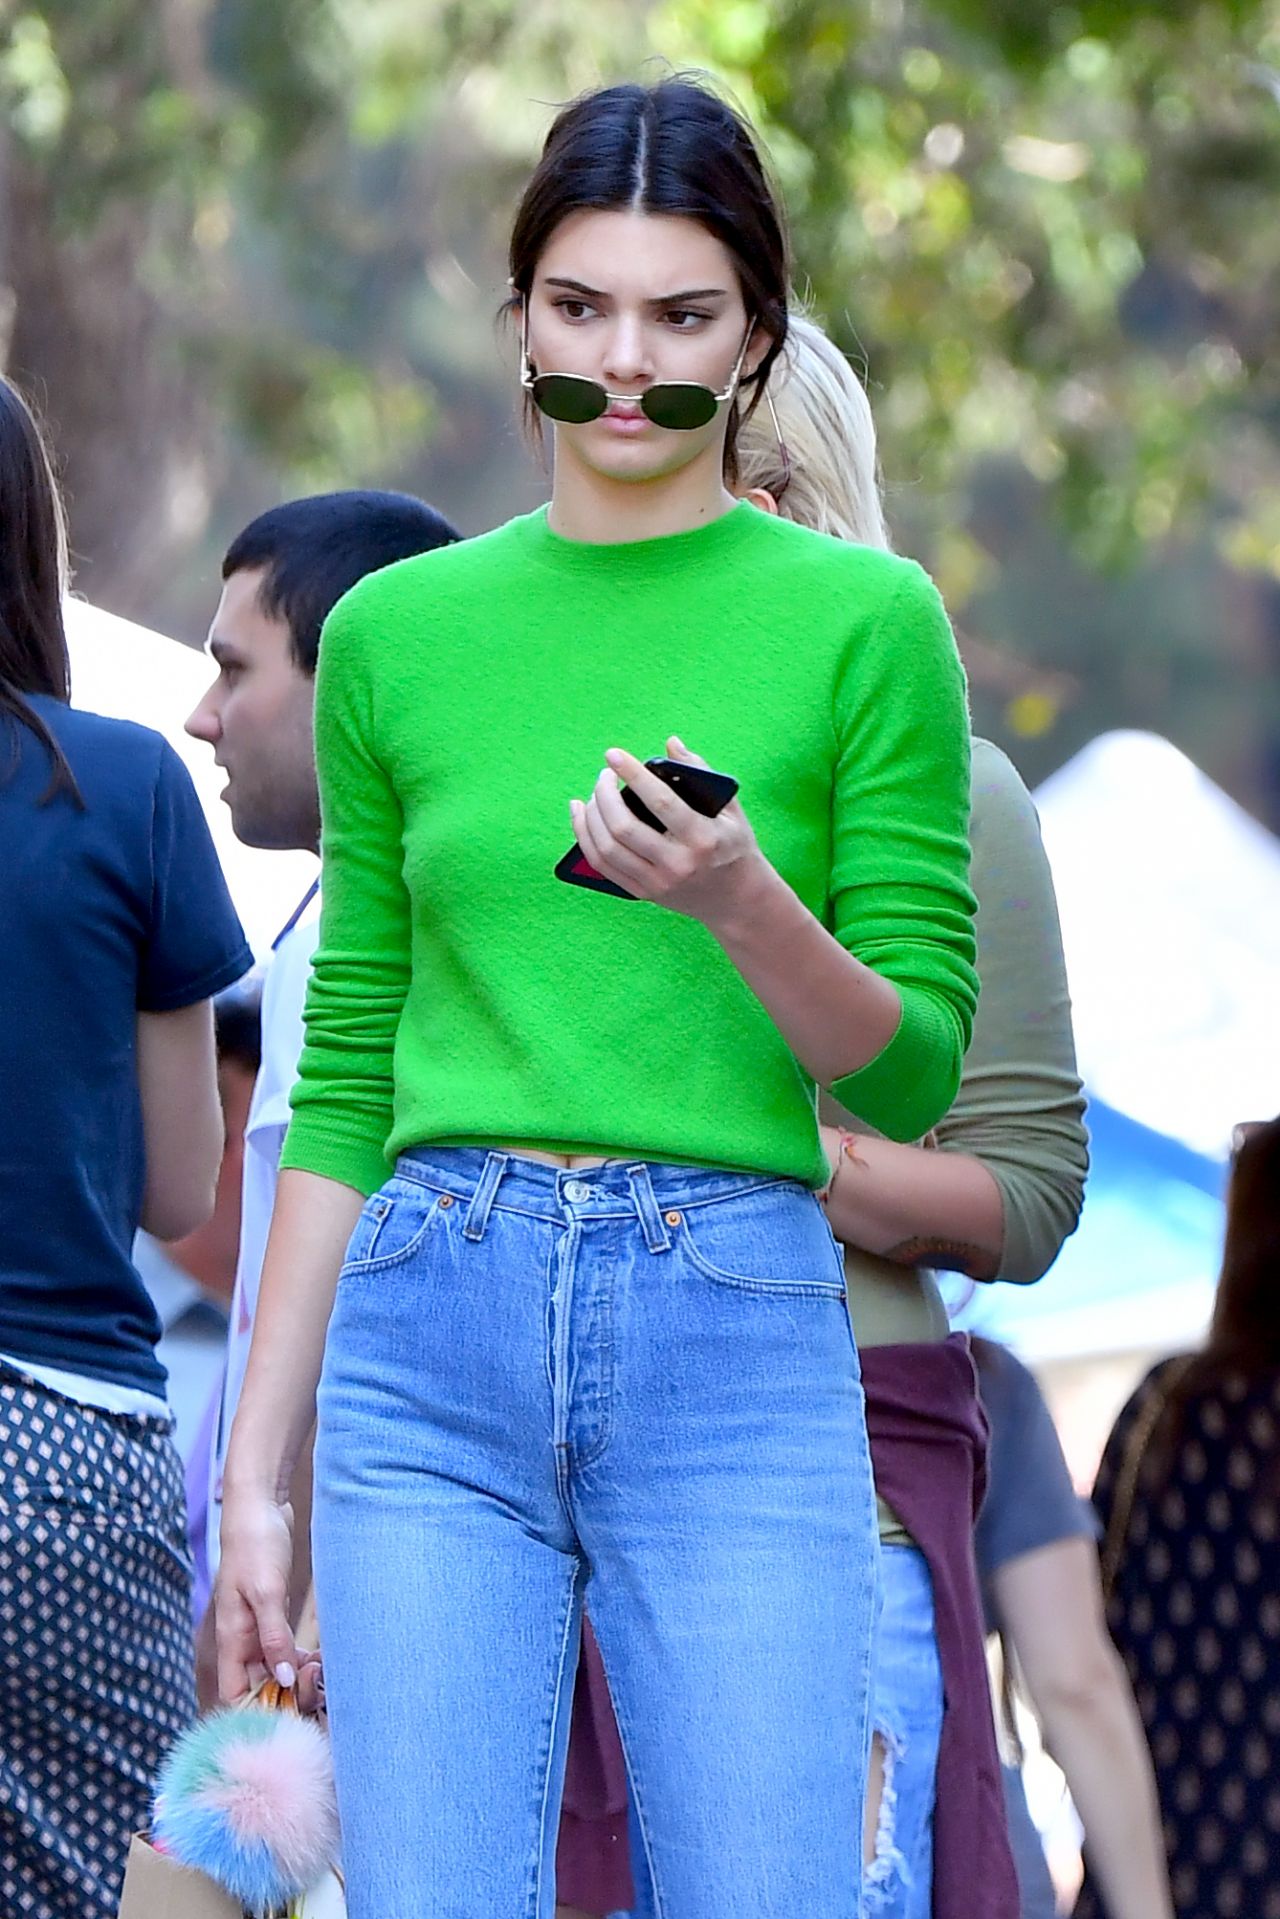 Kendall Jenner in Jeans at the Flea Market in Los Angeles 3/26/2017